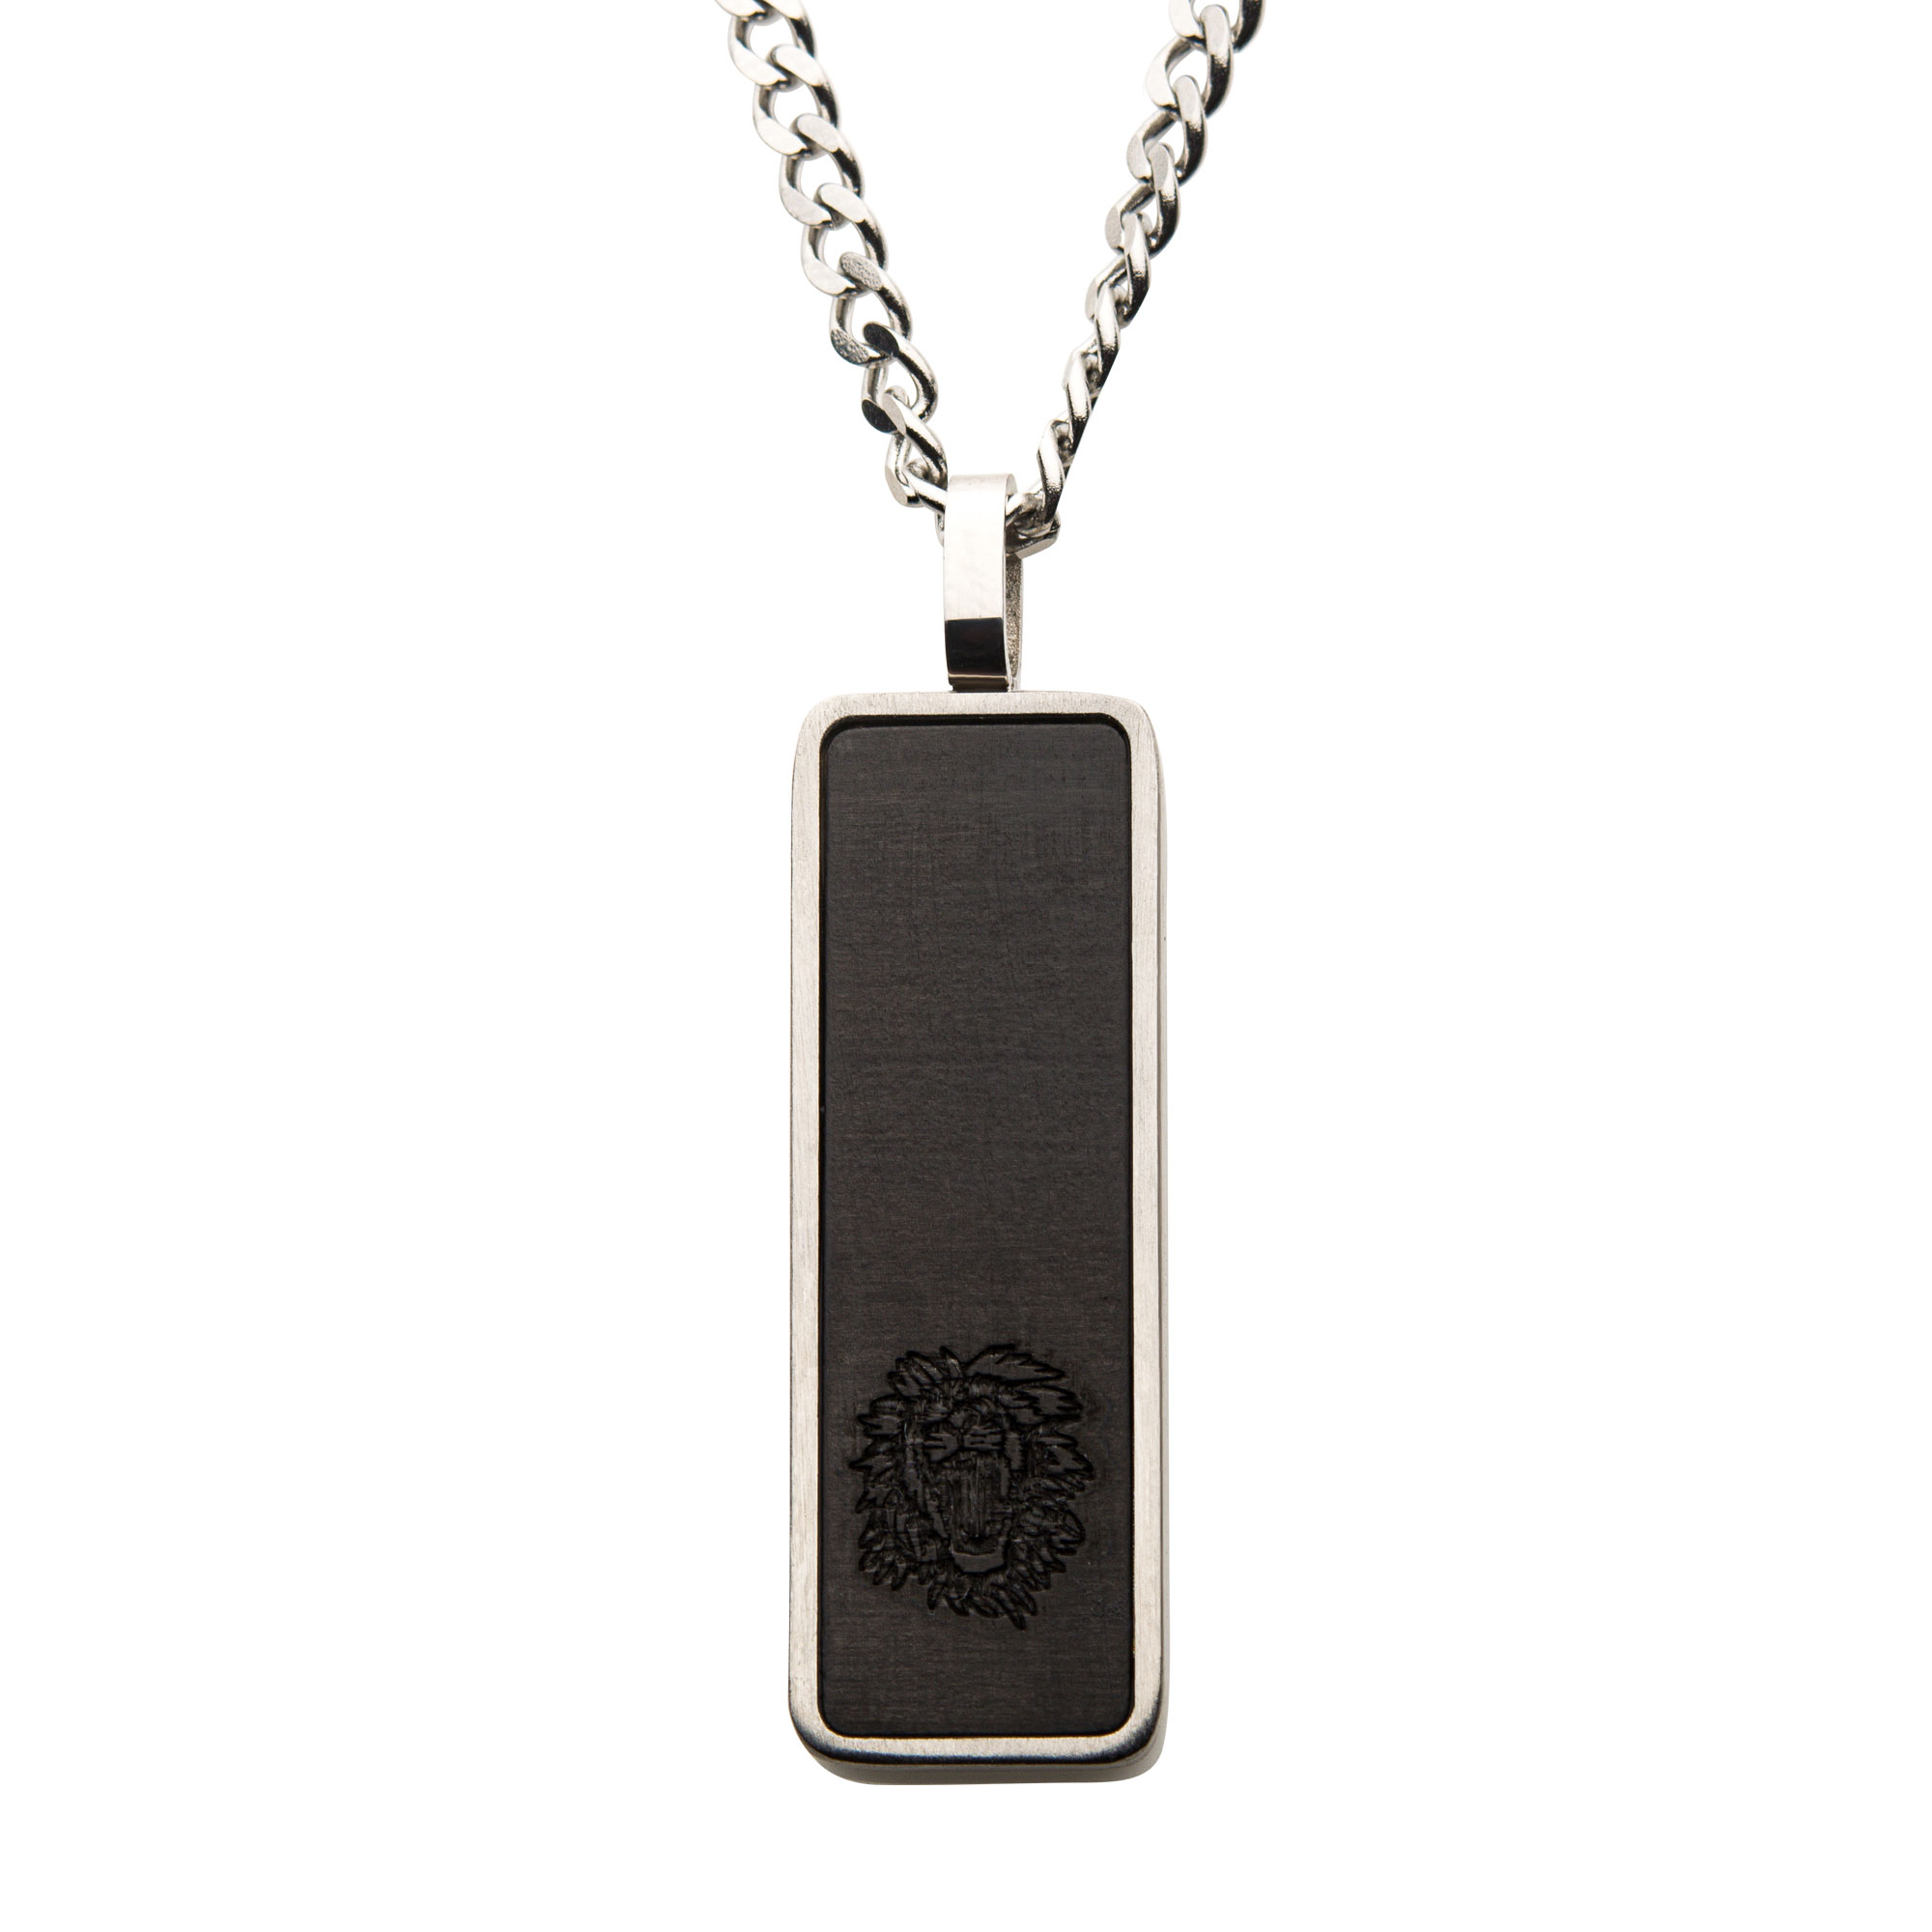 Carbon Fiber & Steel Dog Tag Pendant with Steel Curb Chain Lewis Jewelers, Inc. Ansonia, CT